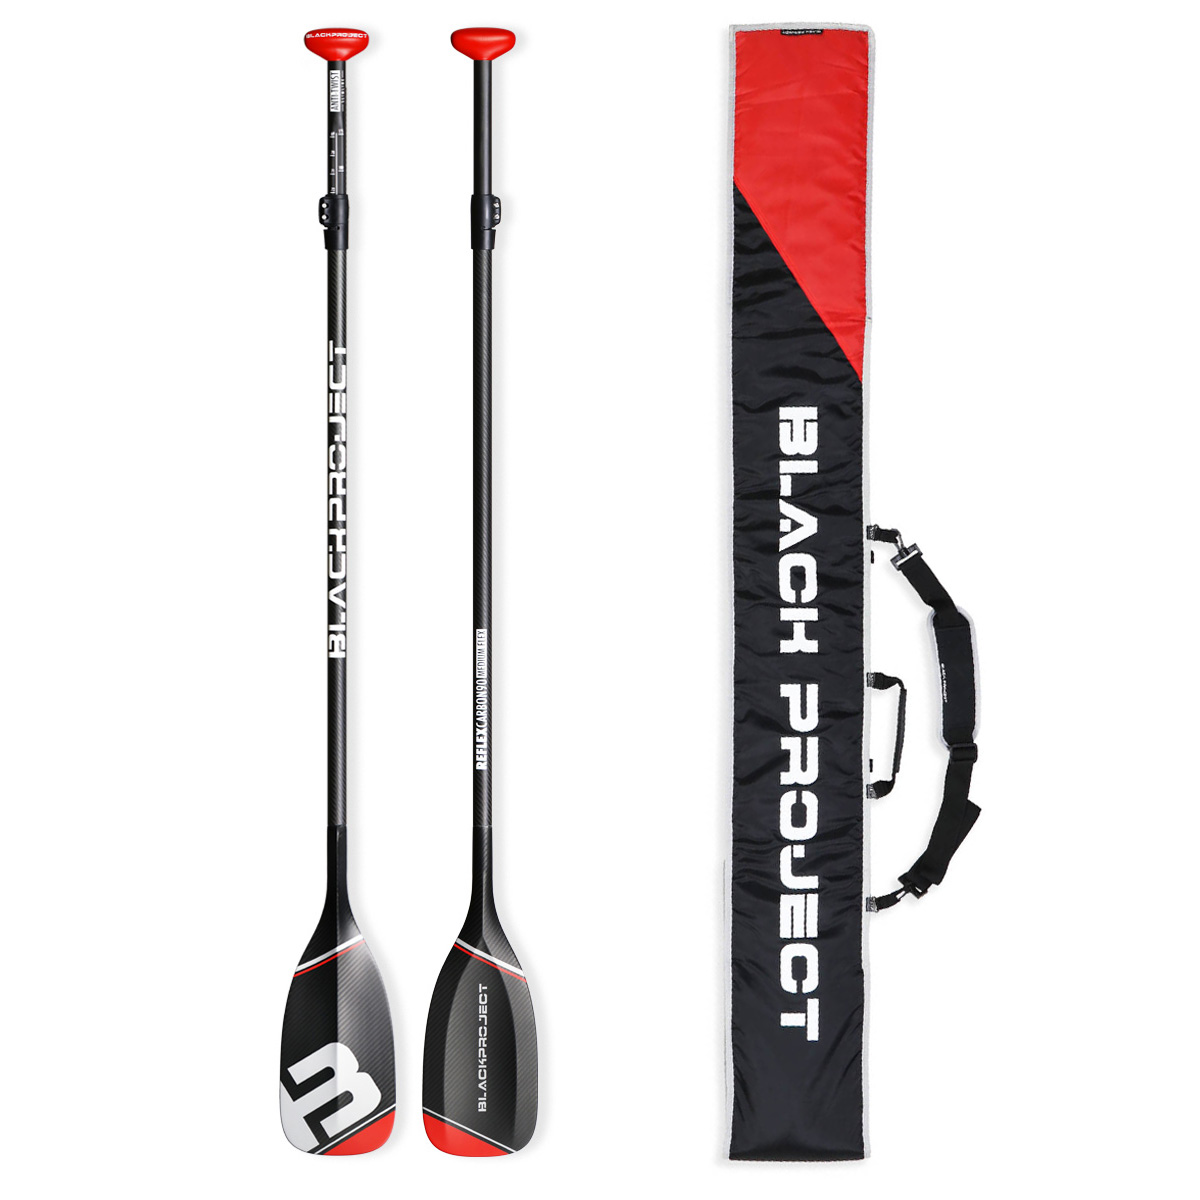 Hydro TempoX Adjustable SUP Paddle | BLACK PROJECT SUP